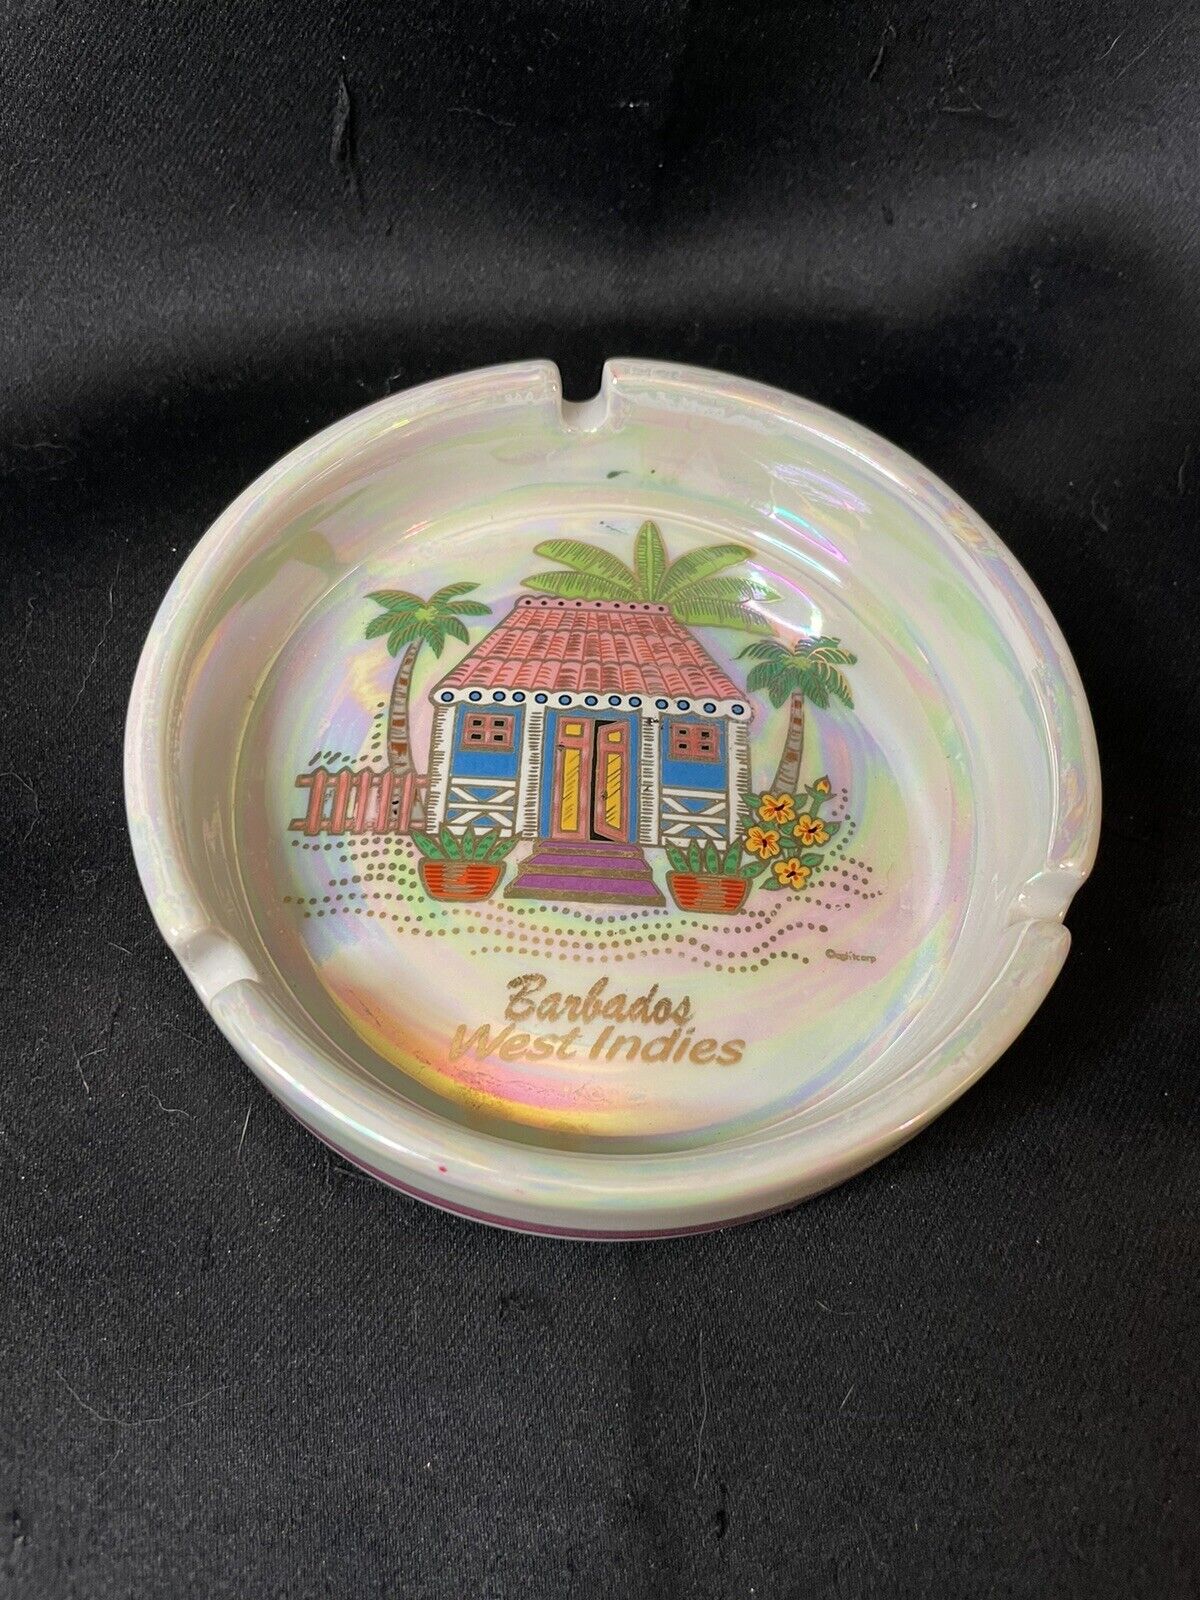 Vintage Ashtray from Barbados West Indies